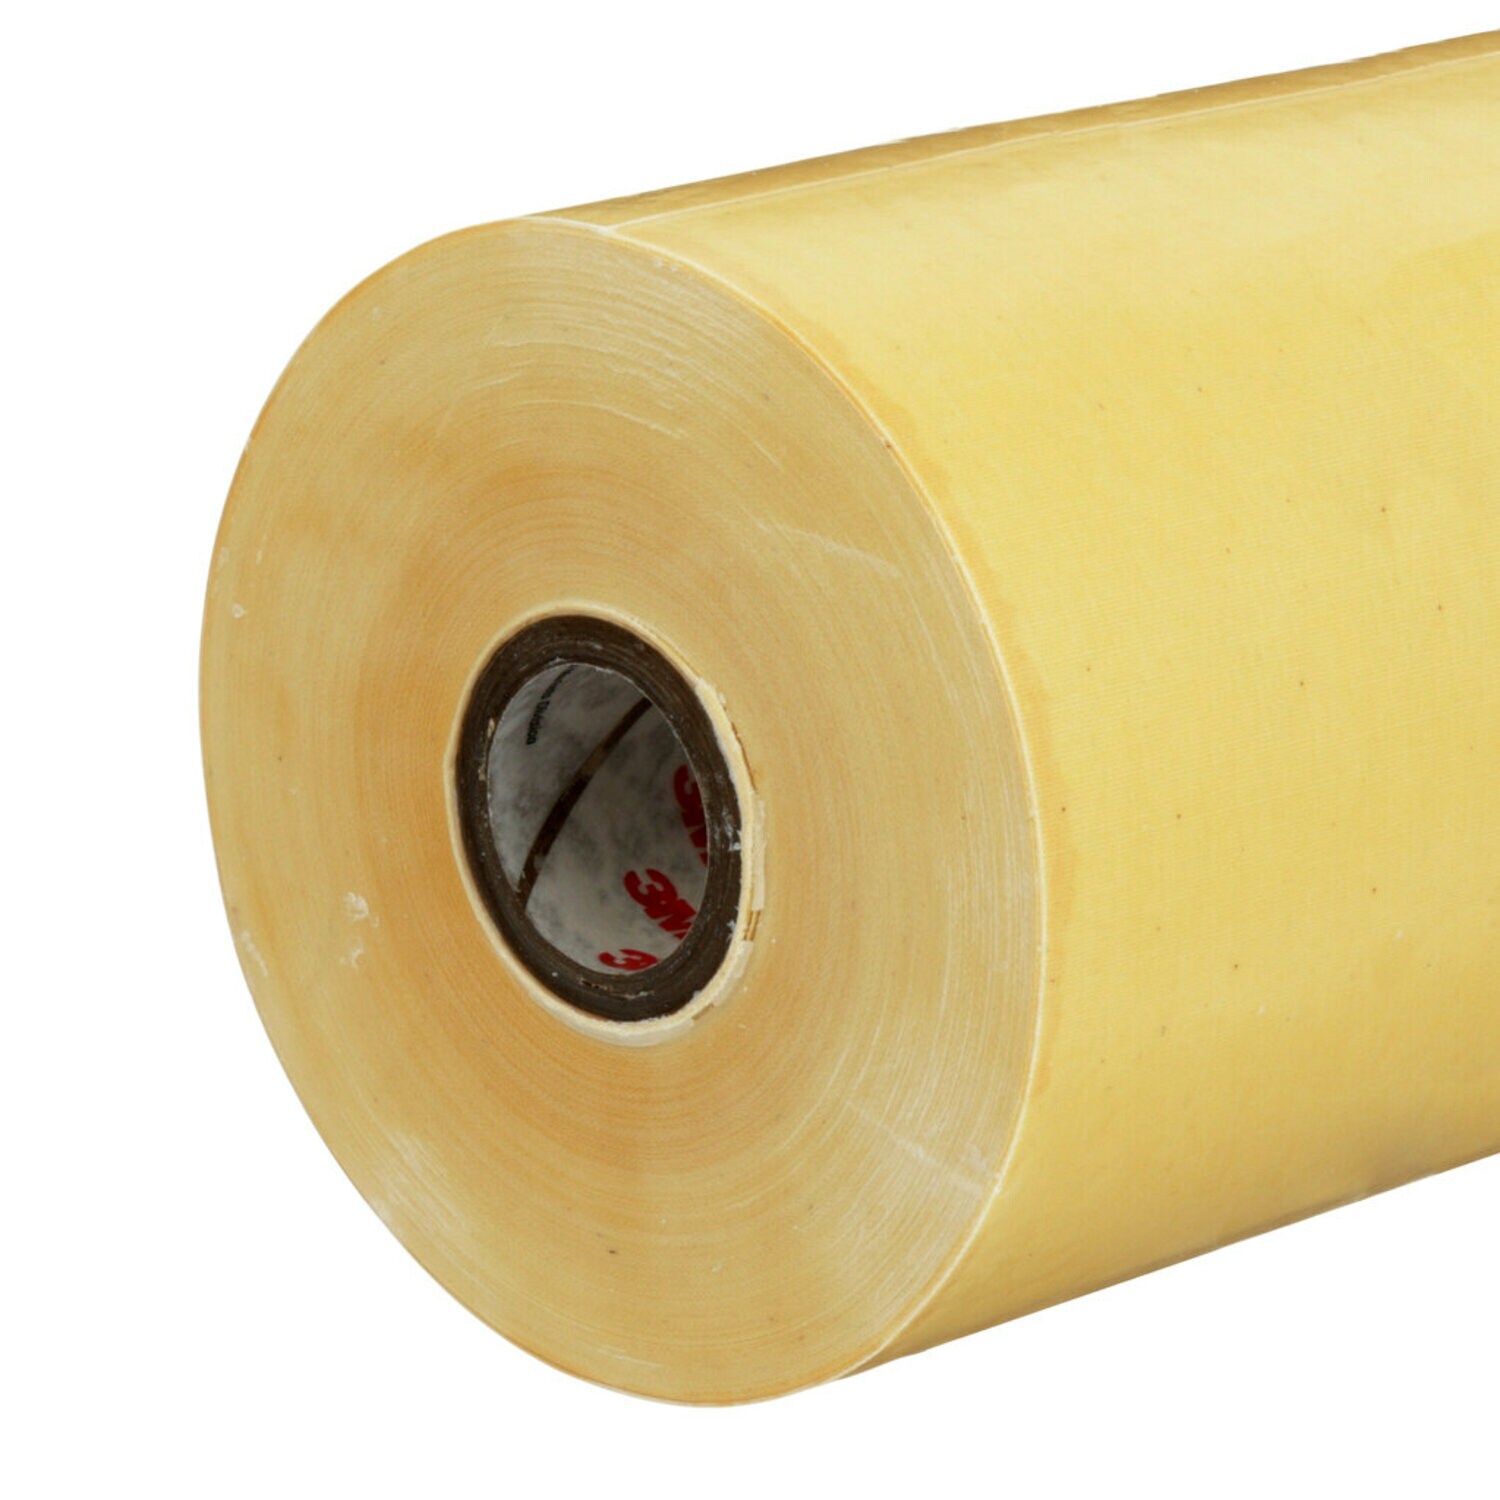 7100064117 - Scotch Varnished Cambric Tape 2510, 29 in x 25 yd, Yellow, 1 roll/Case